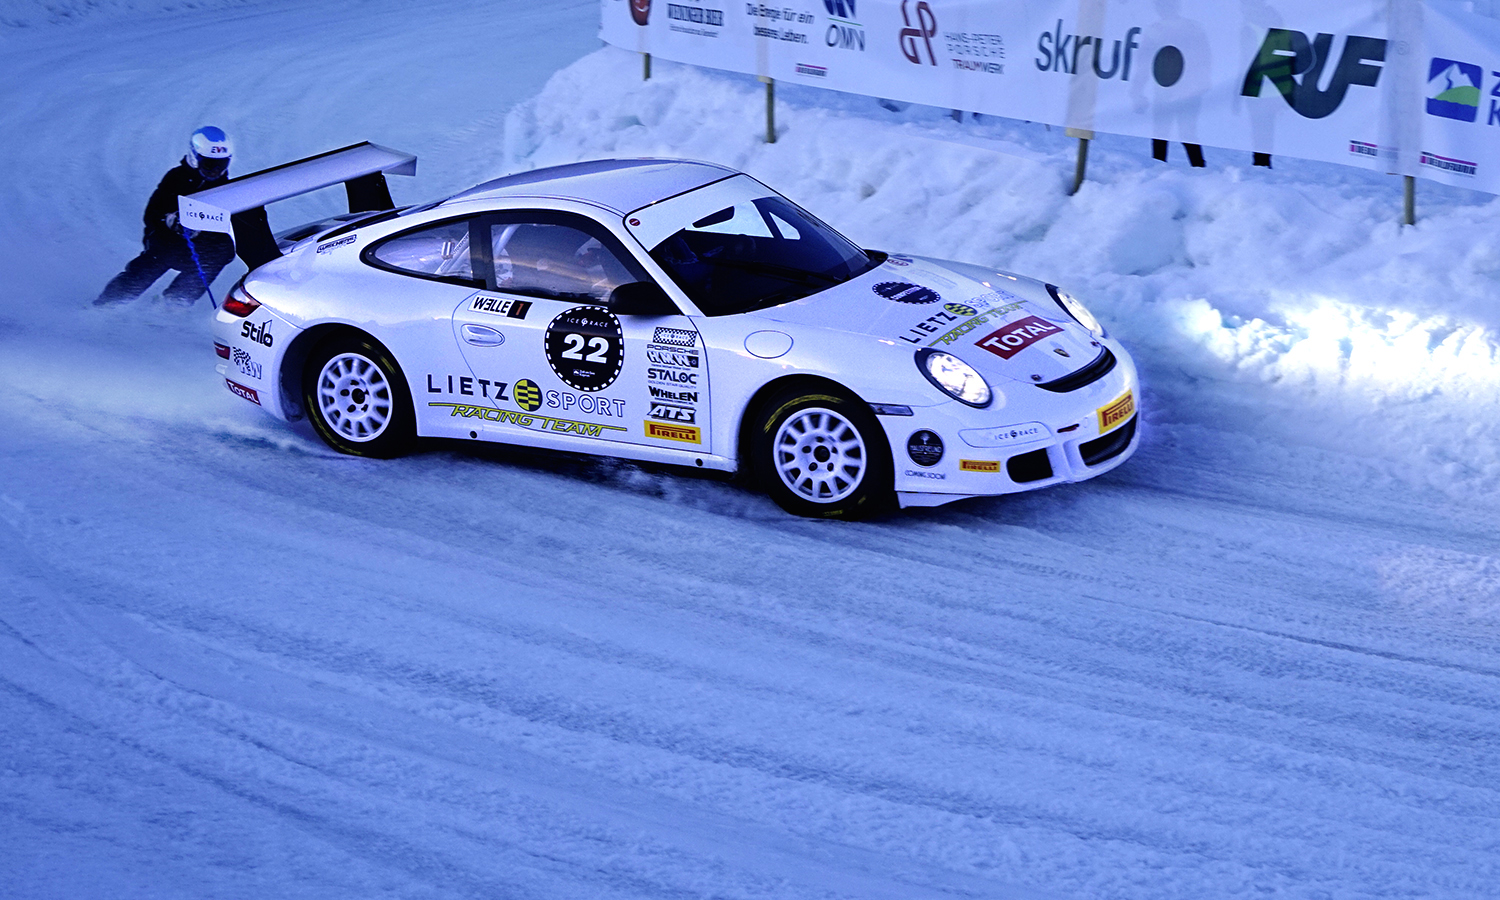 GP ICE RACE am 1.2.2020 in Zell am See